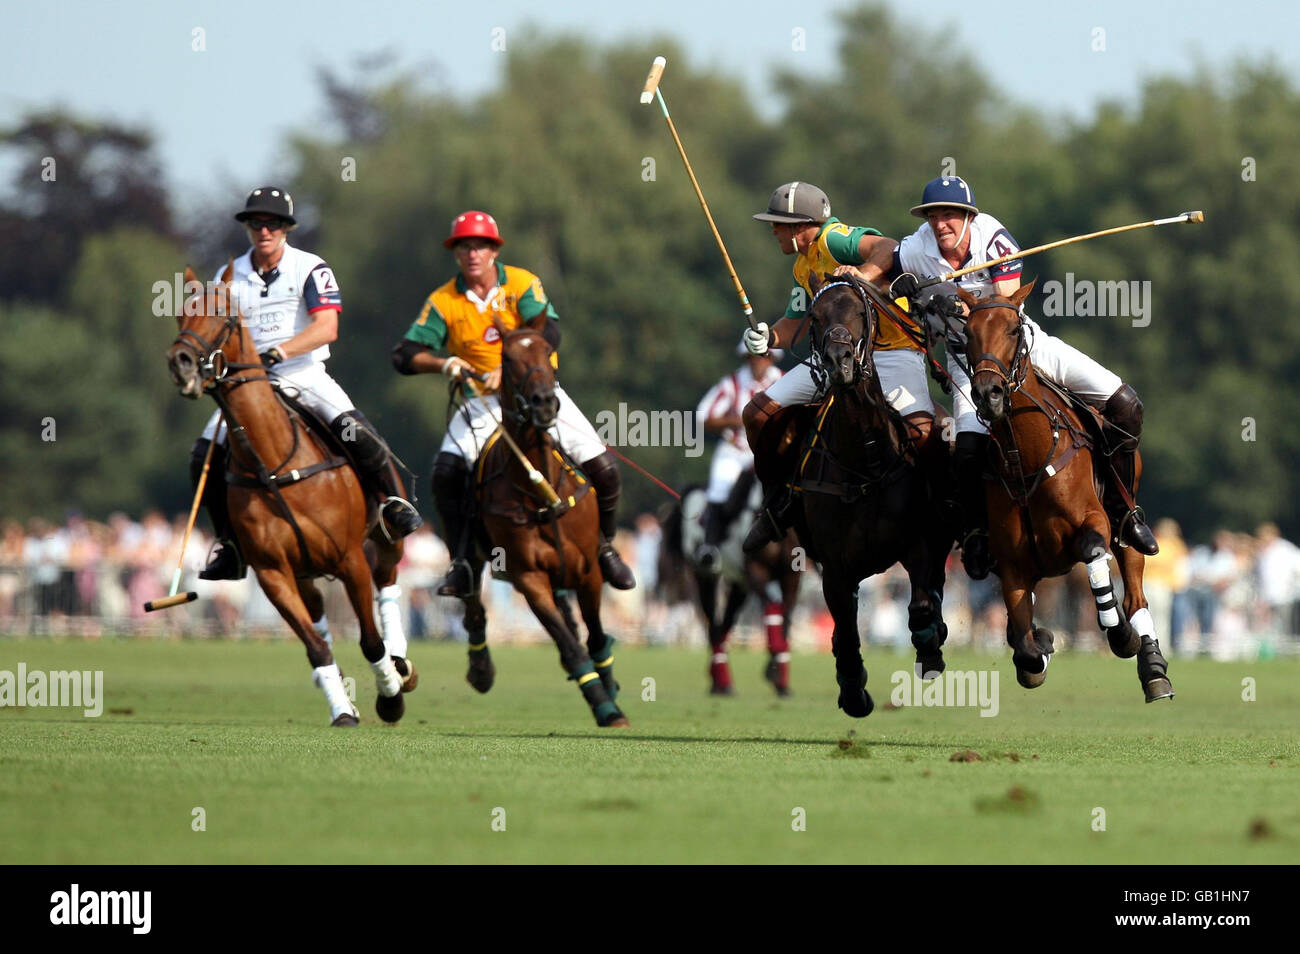 England and Australia battle in the Coronation Cup match at the Cartier International Polo at the Guards Polo Club in the Great Park in Windsor, Berkshire. Stock Photo